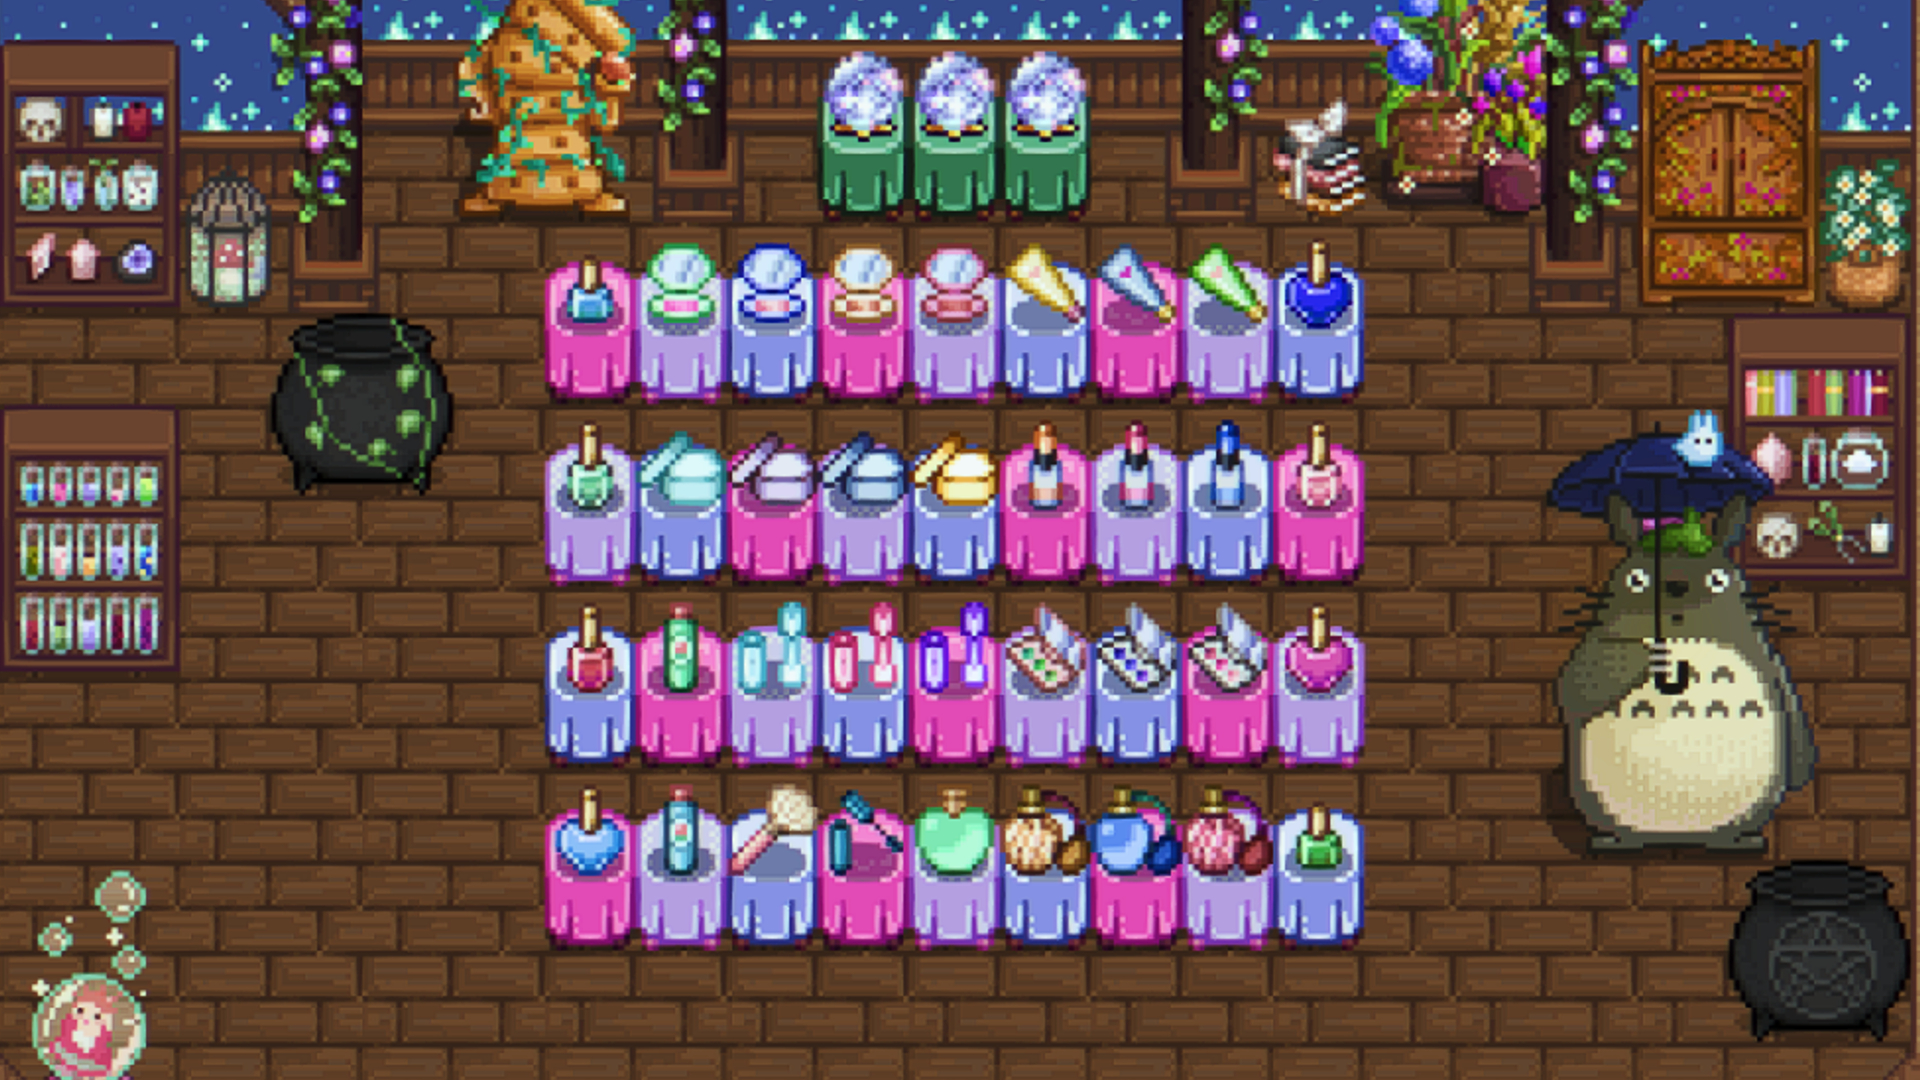 Pink and purple tables arranged to show off various goods made in the mod